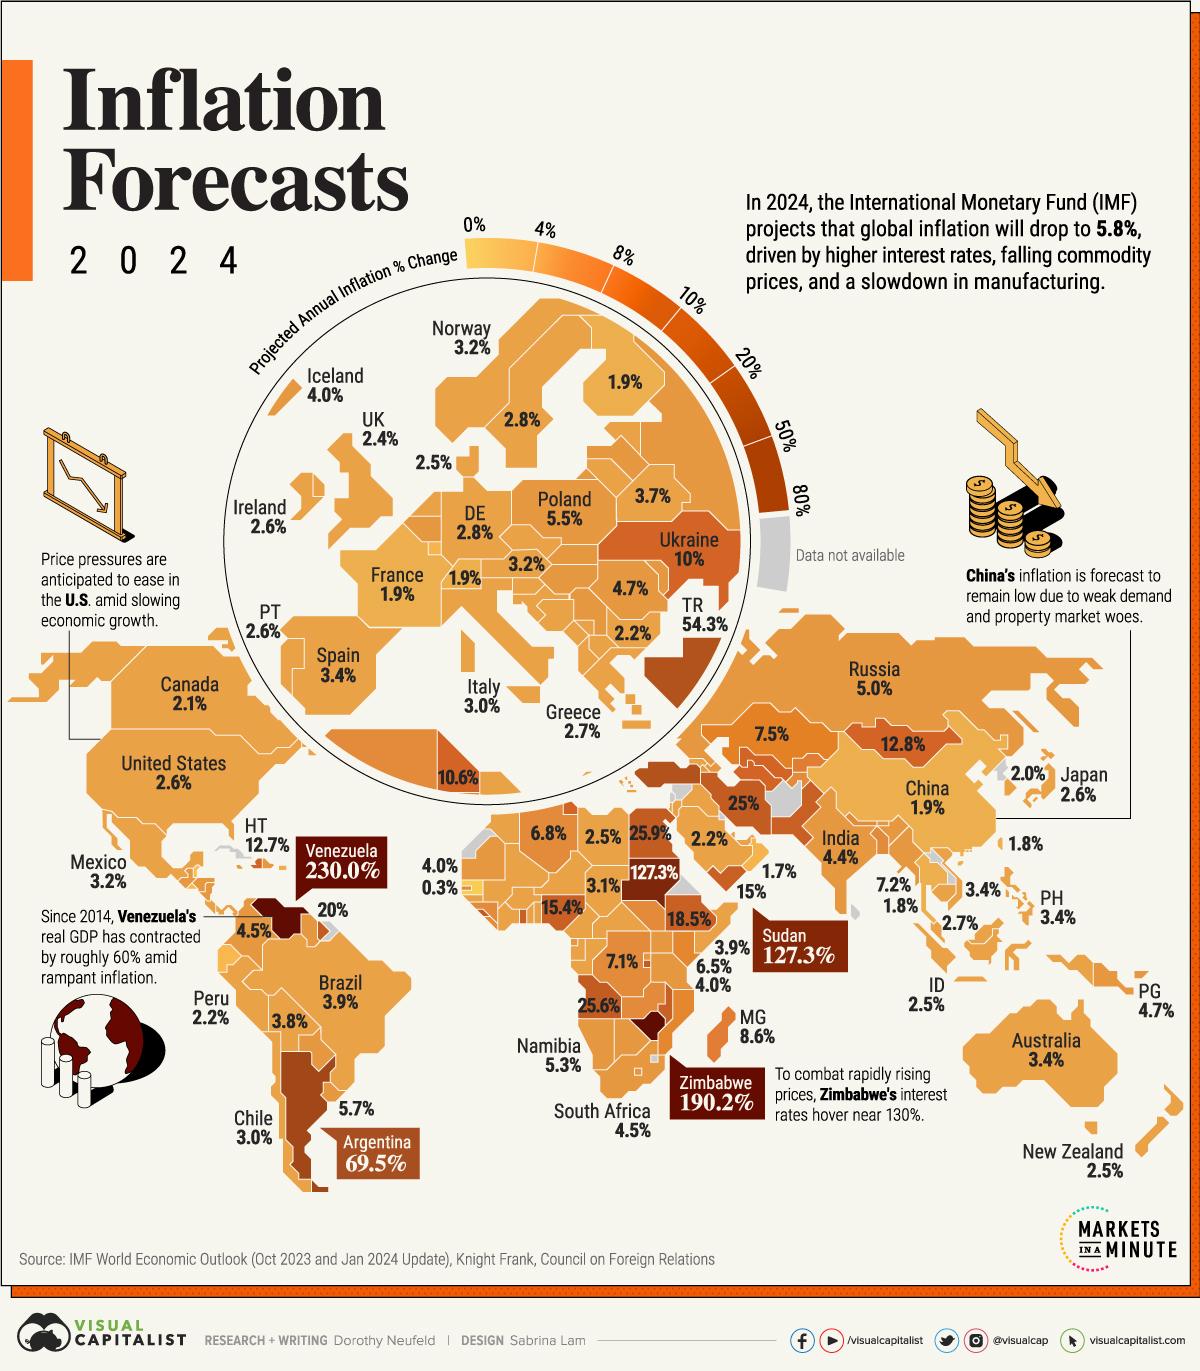 Mapped: Inflation Projections by Country, in 2024